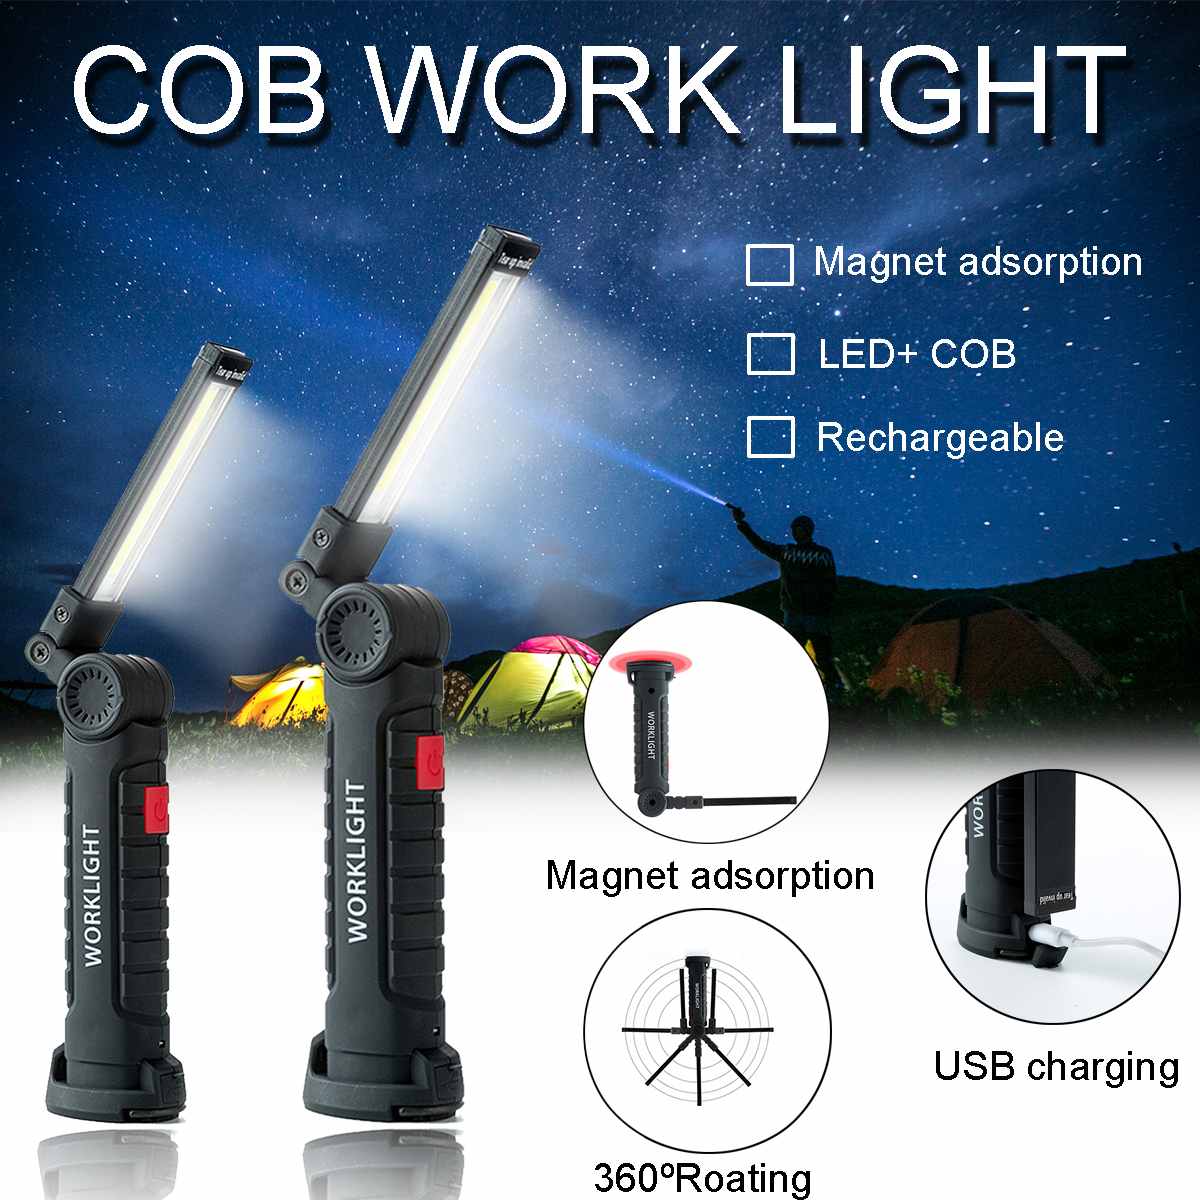 COB LED Rechargeable Work Light Magnetic Torch Flexible Inspection Lamp Cordless 